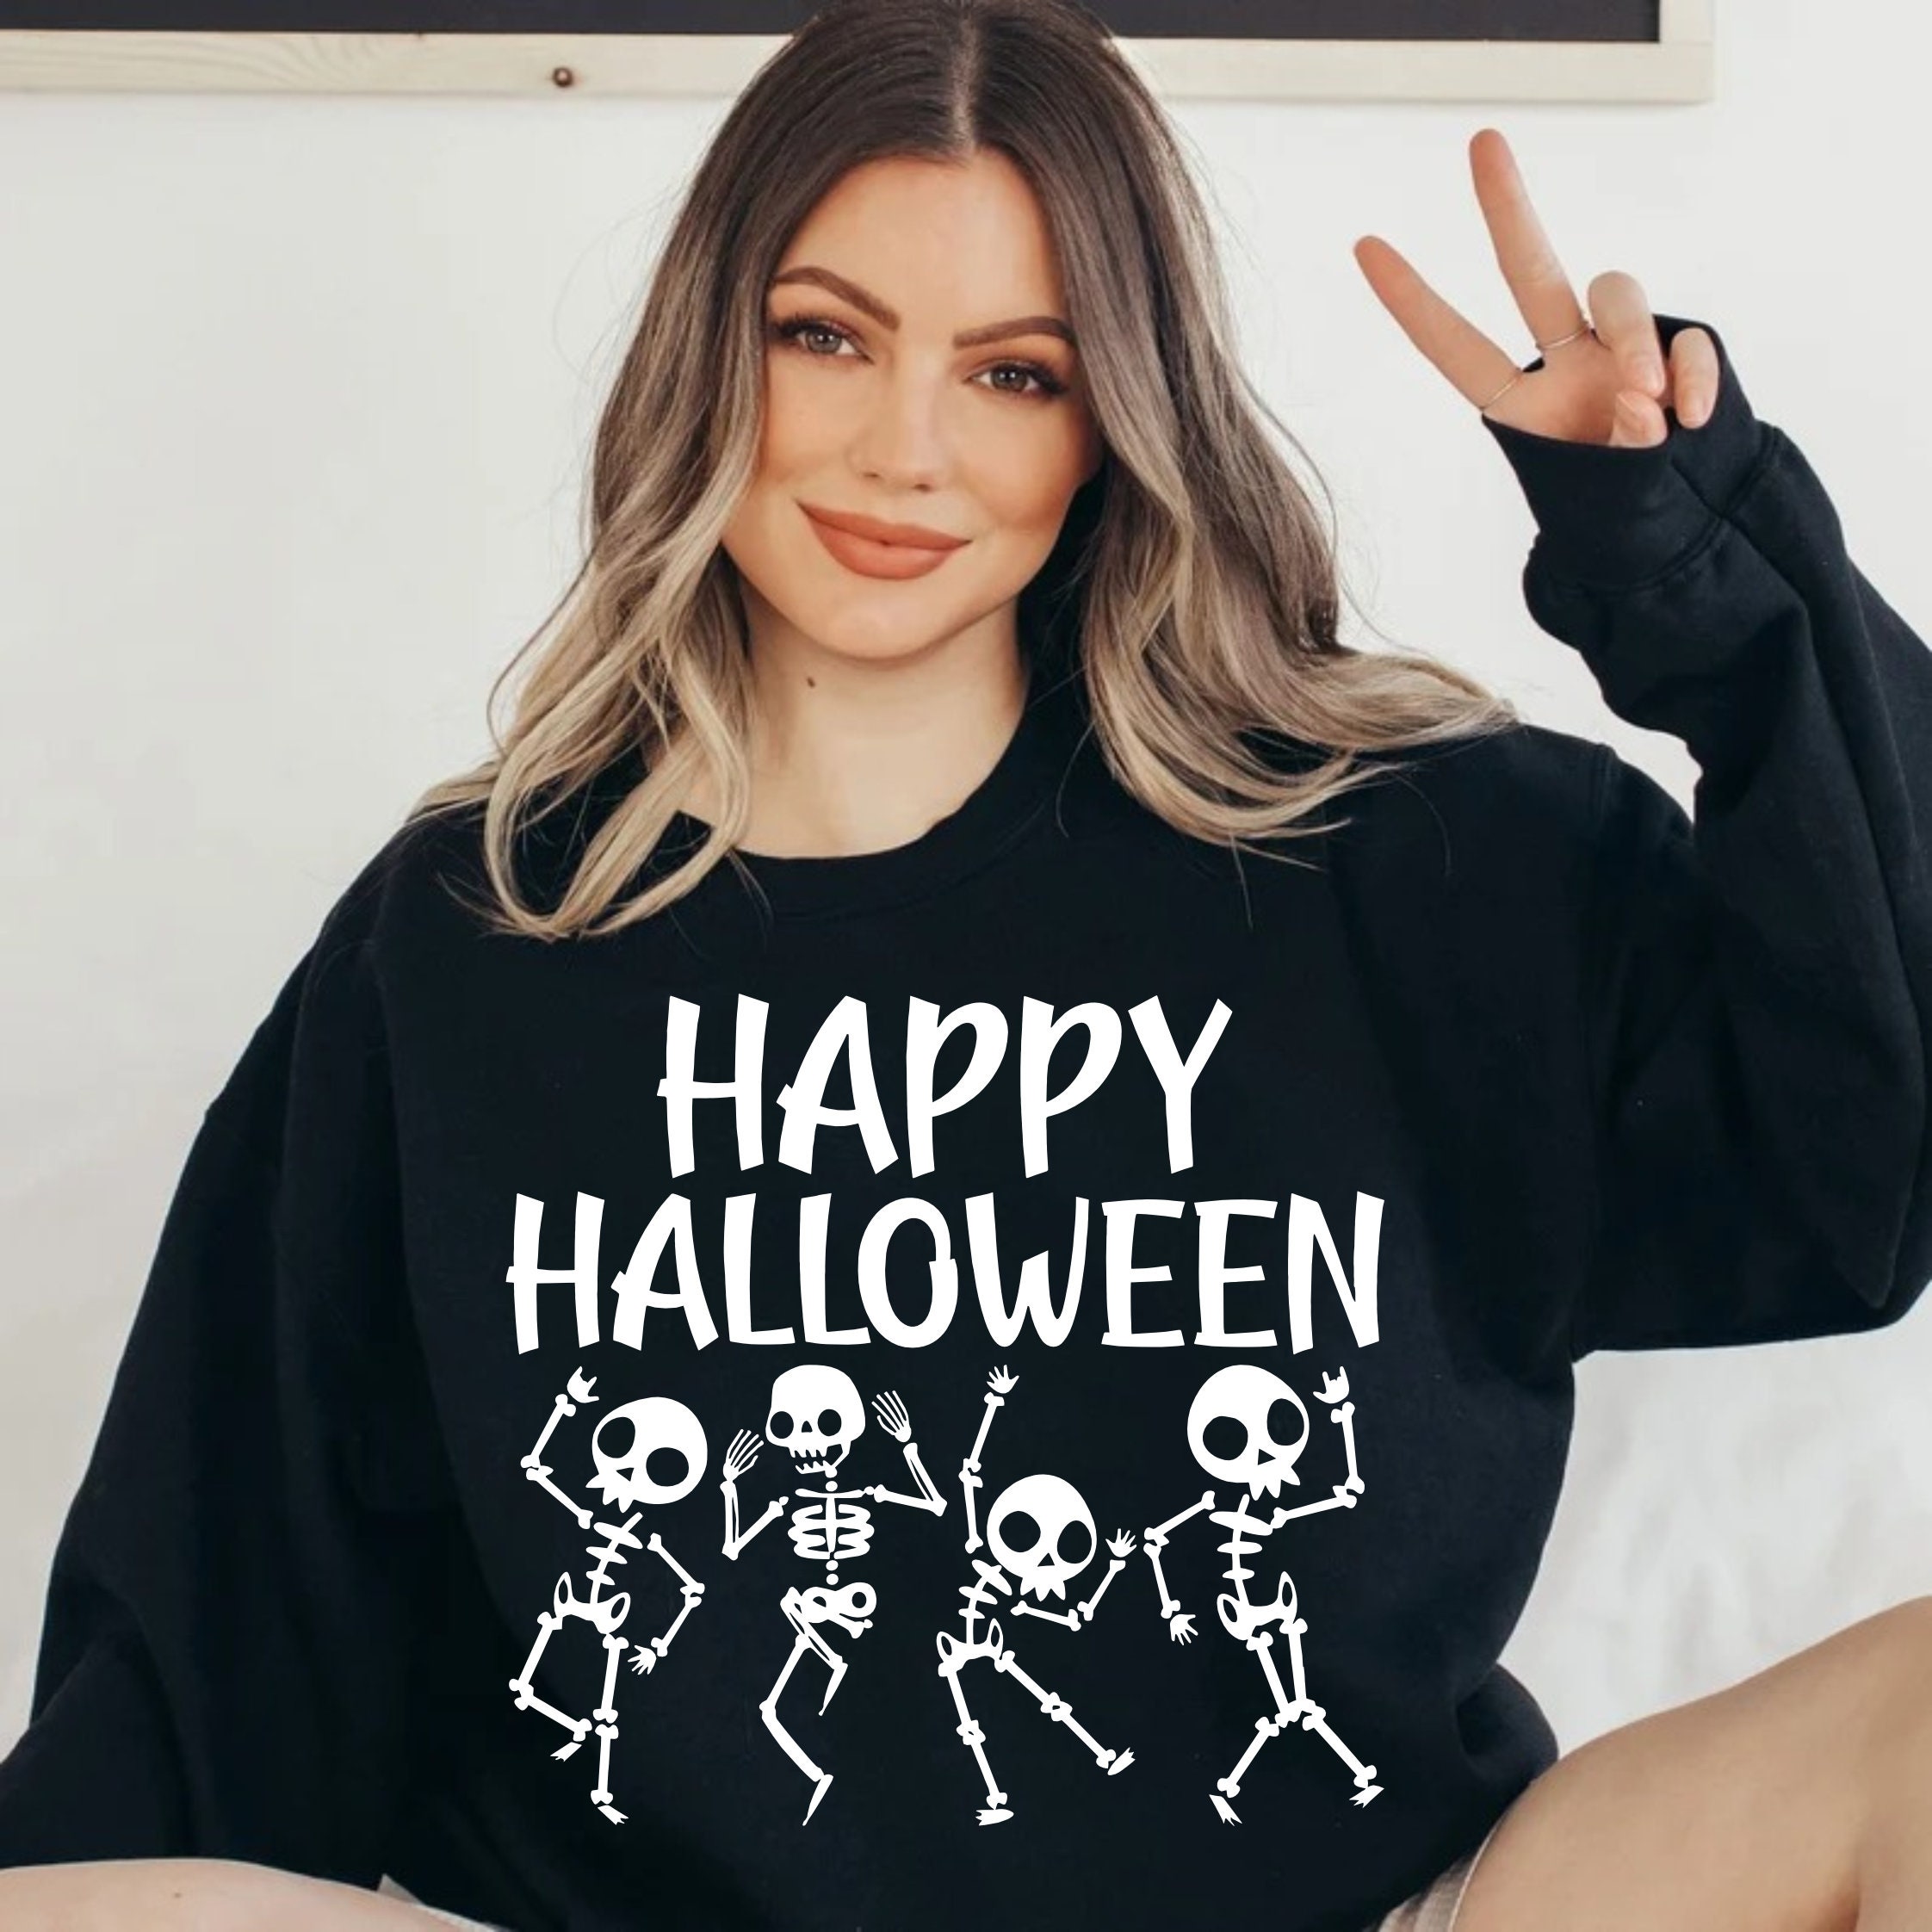 Saw these cute Halloween shirts at Target (US). Wish they had